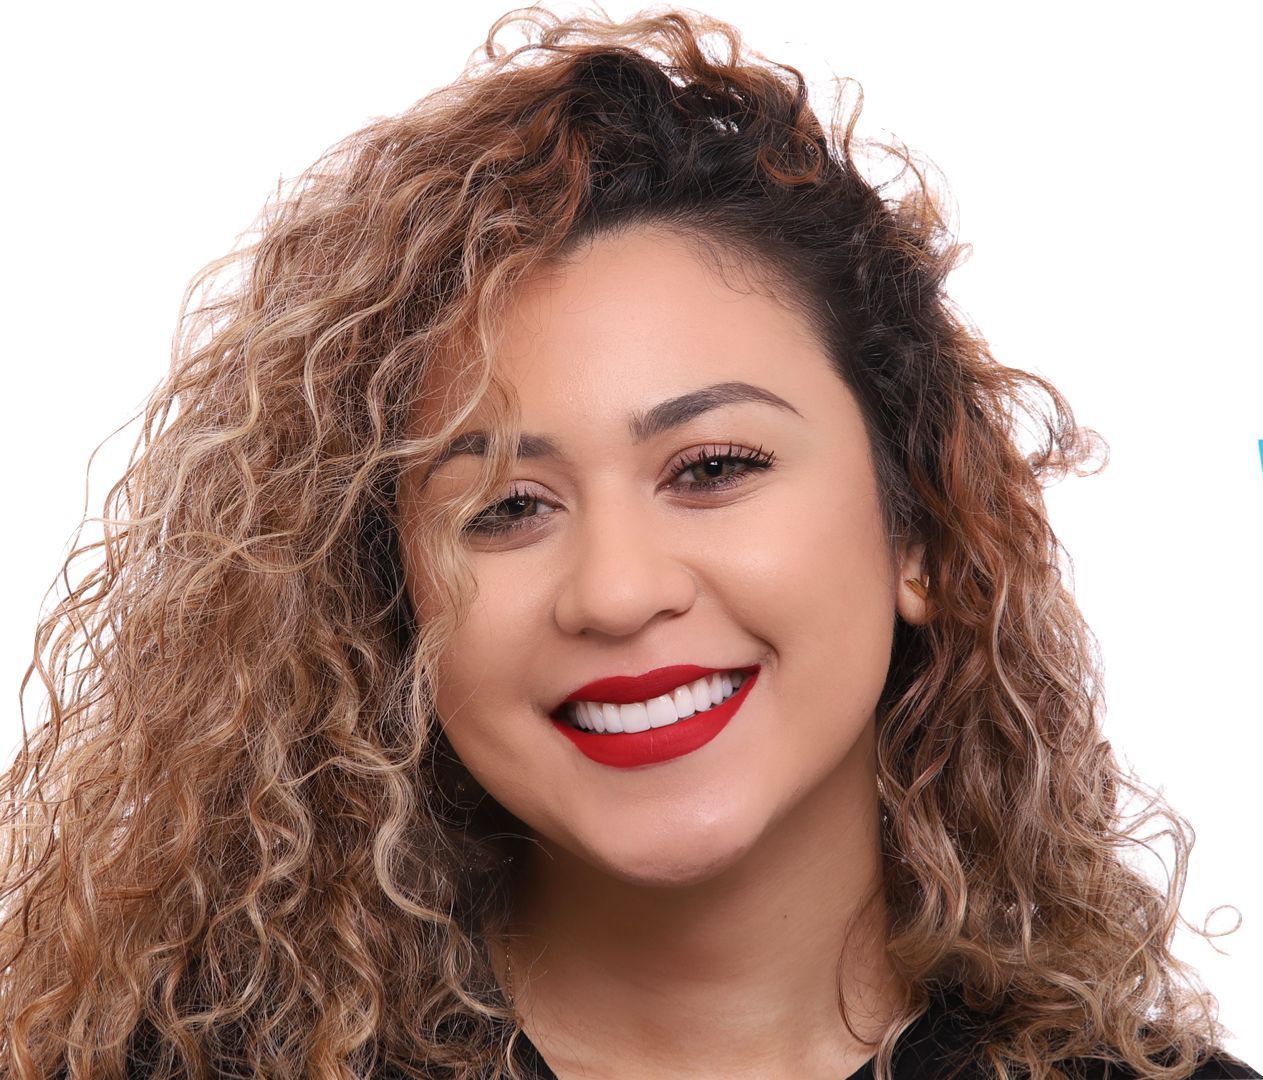 A woman with curly hair and red lipstick smiles for the camera